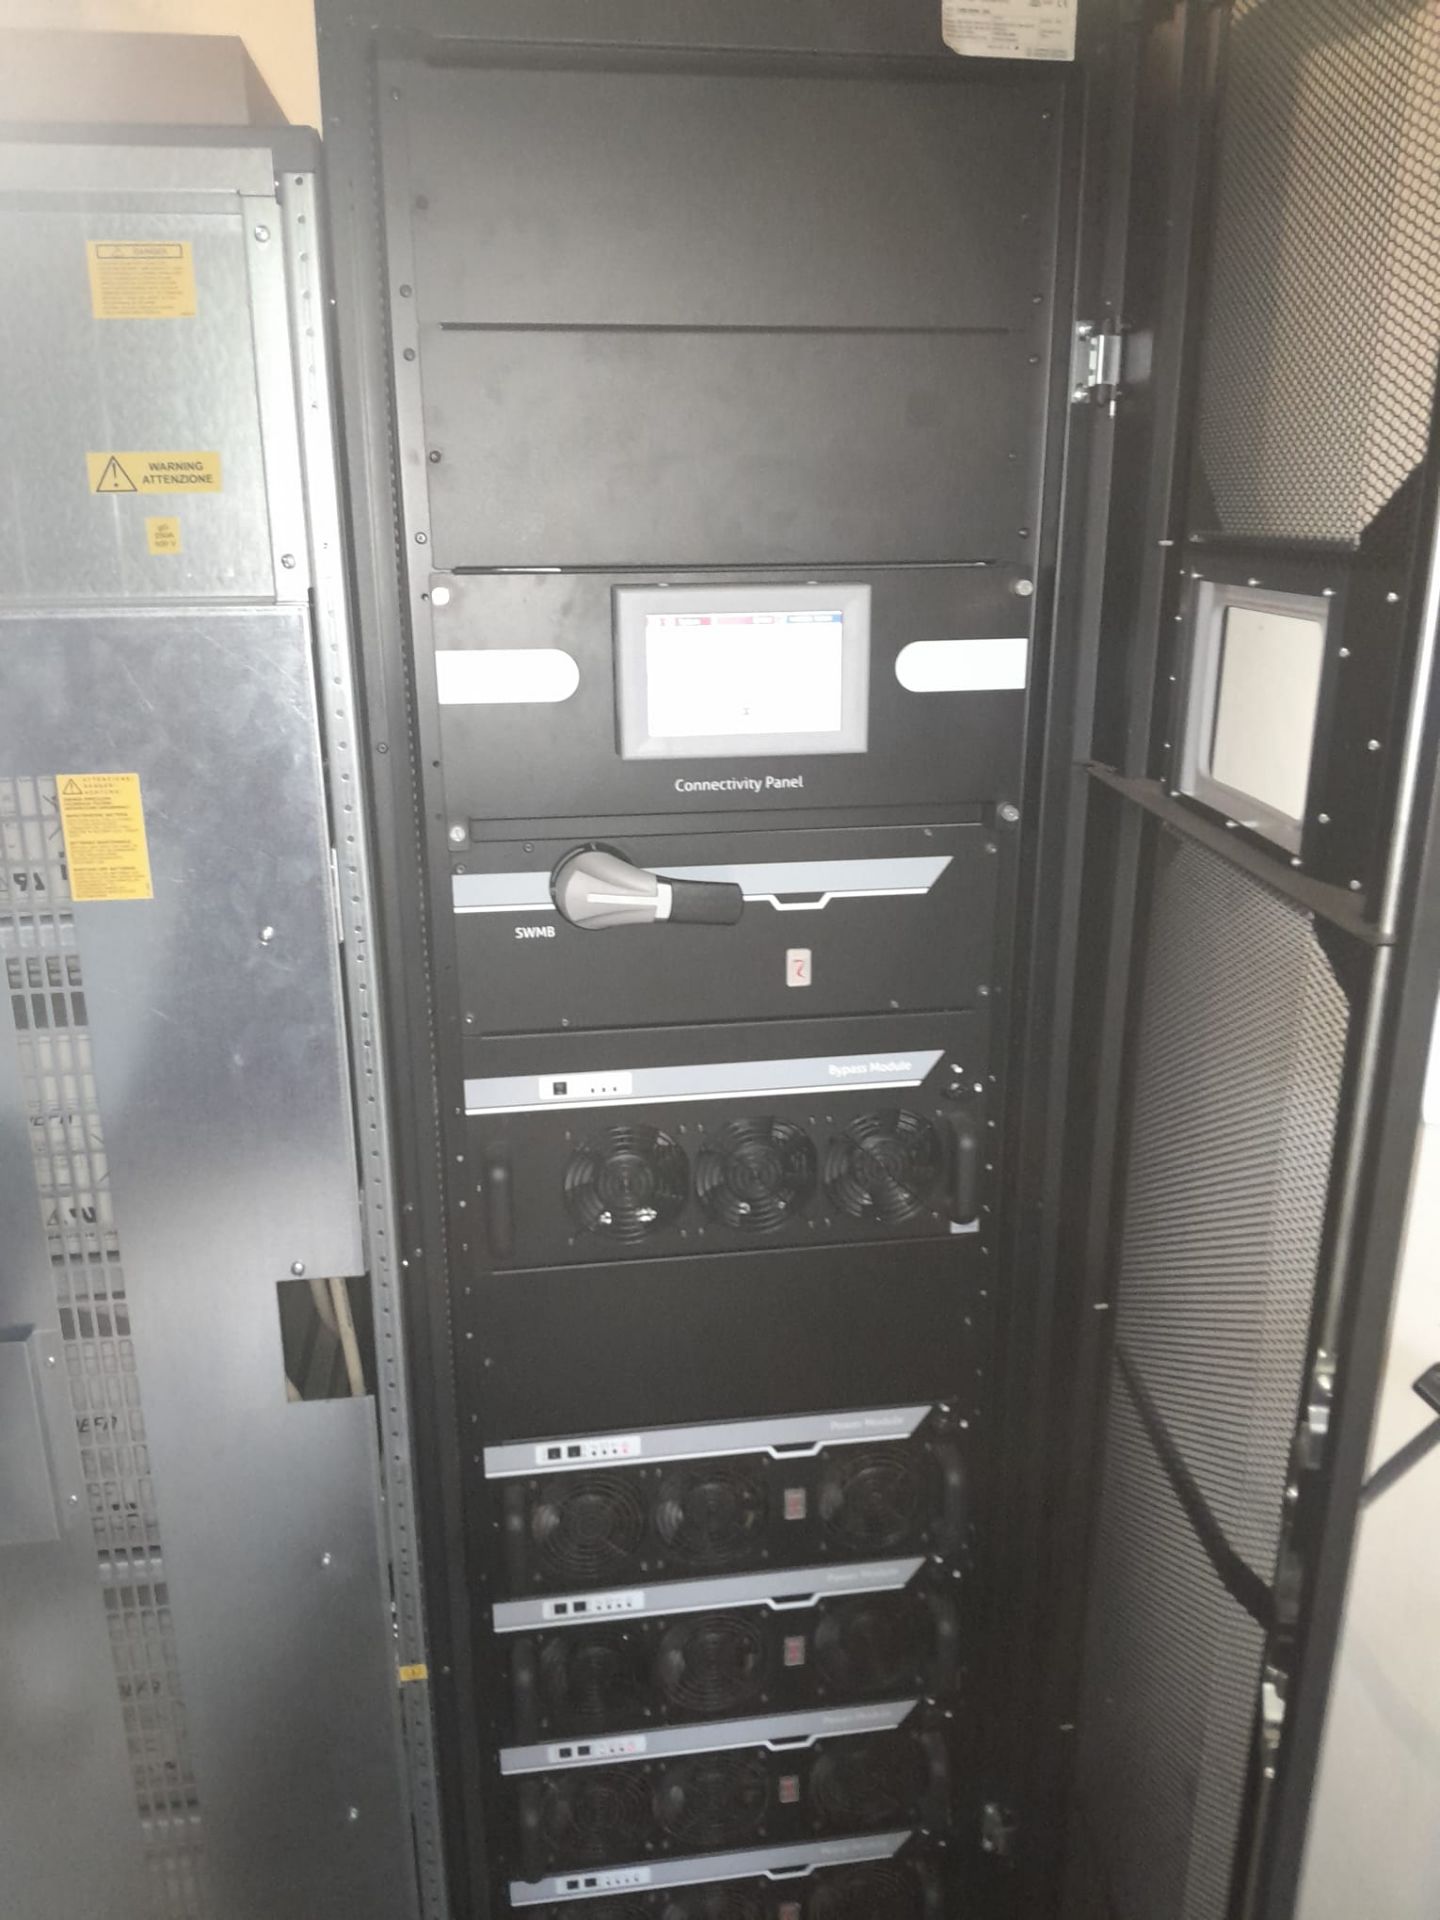 Riello MPW300 Uninterruptible Power Supply UPS, serial no. ME09UP110530007, with connectivity panel, - Image 5 of 11